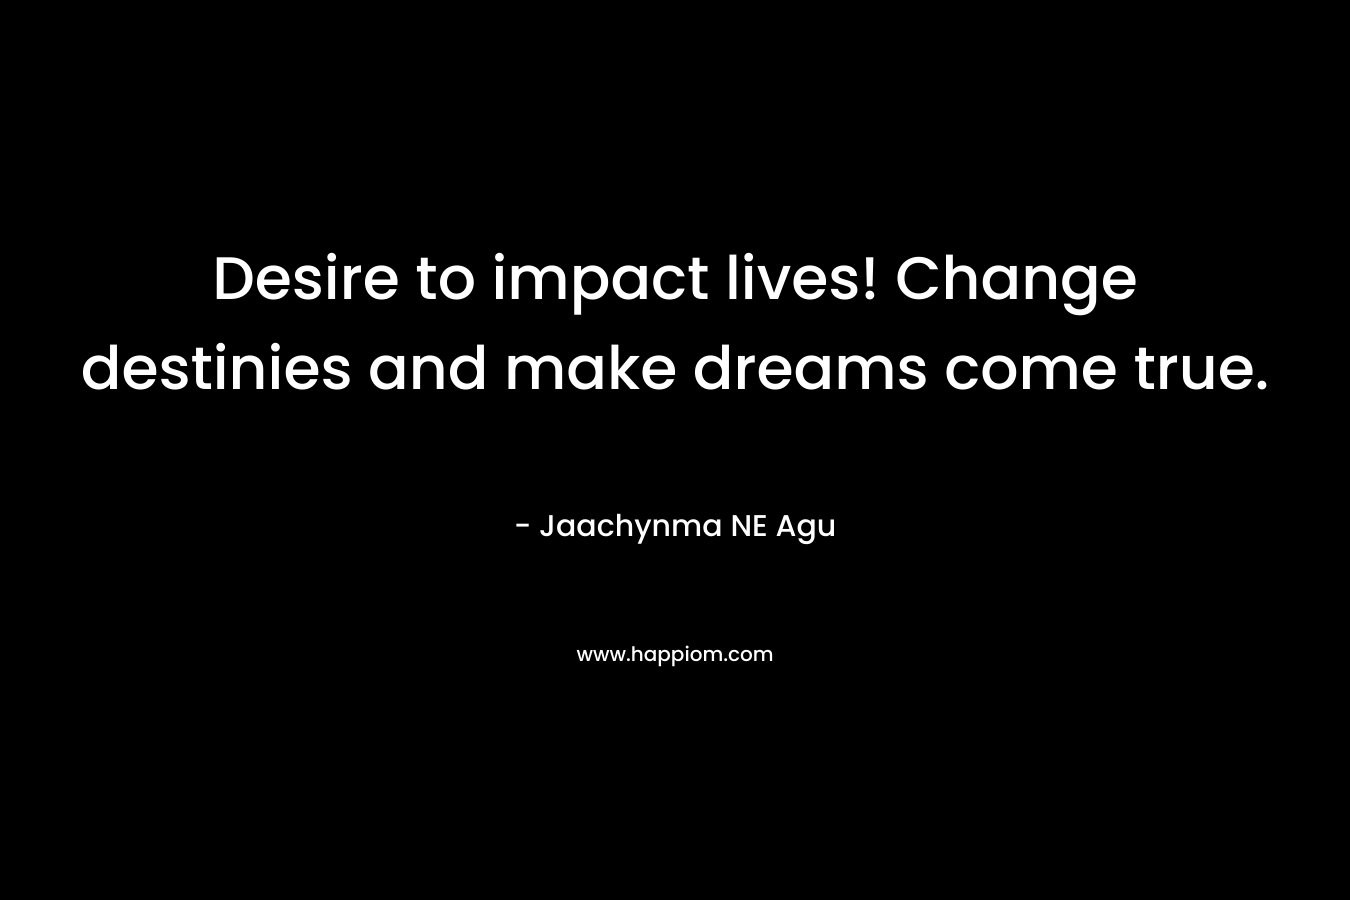 Desire to impact lives! Change destinies and make dreams come true.